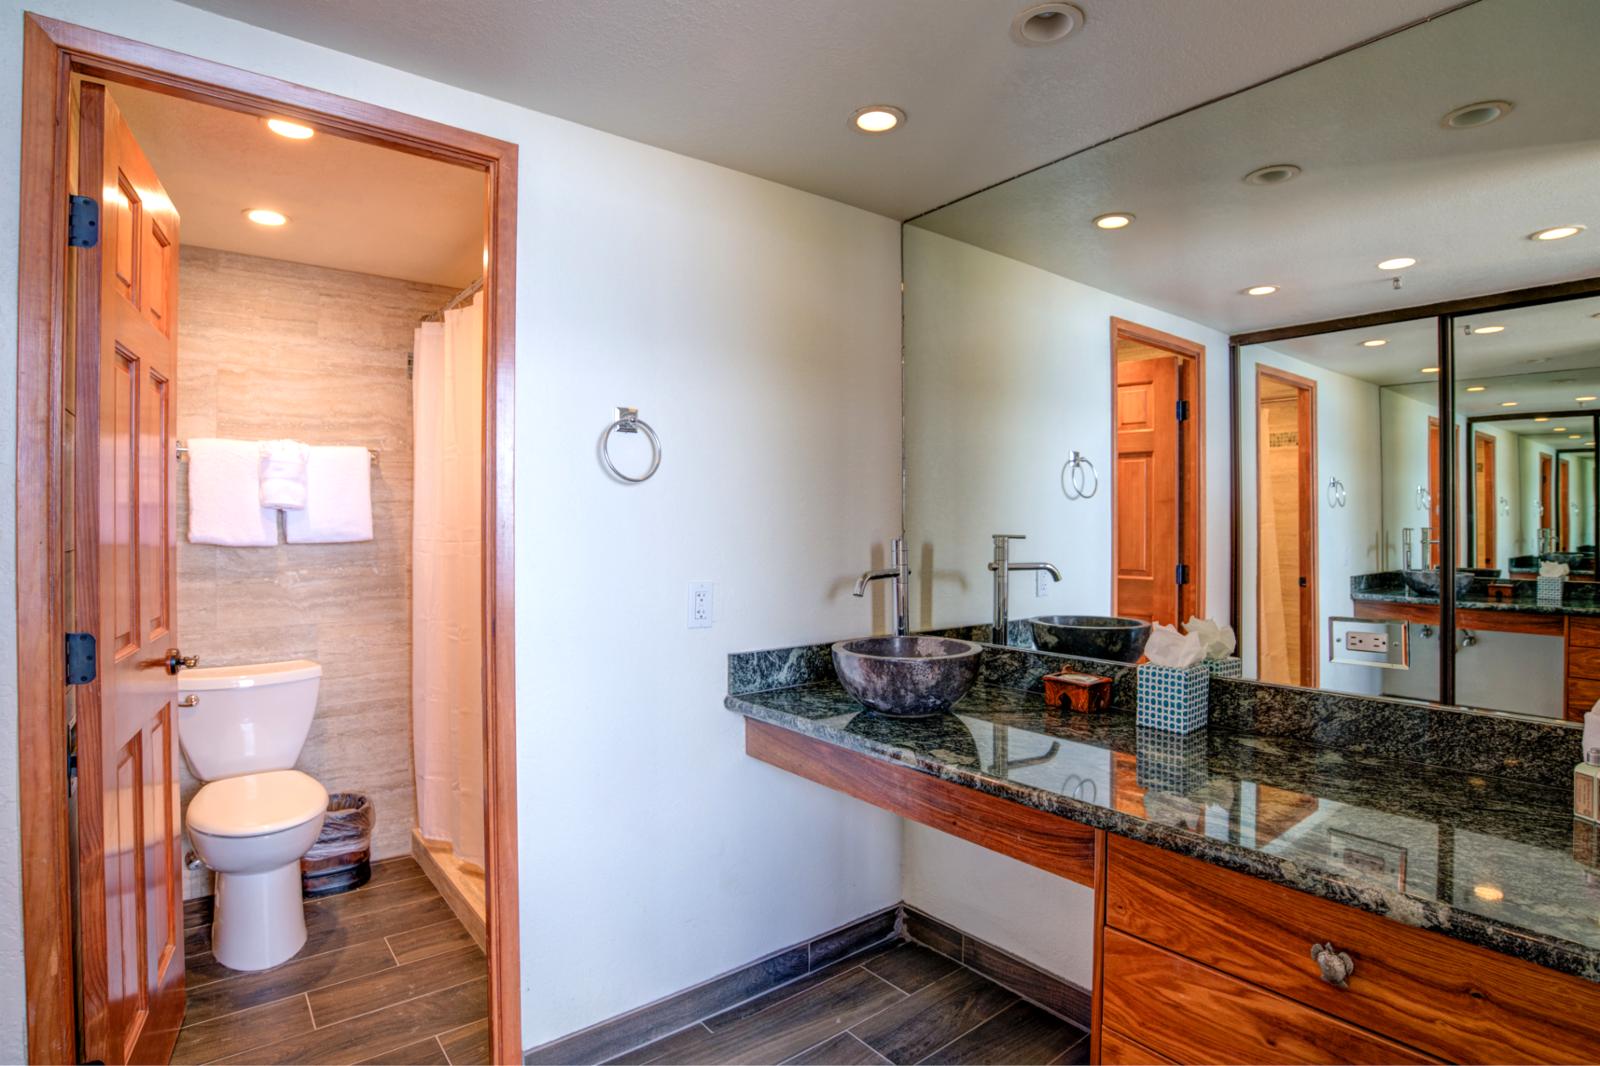 LARGE master bathroom with ample counter space